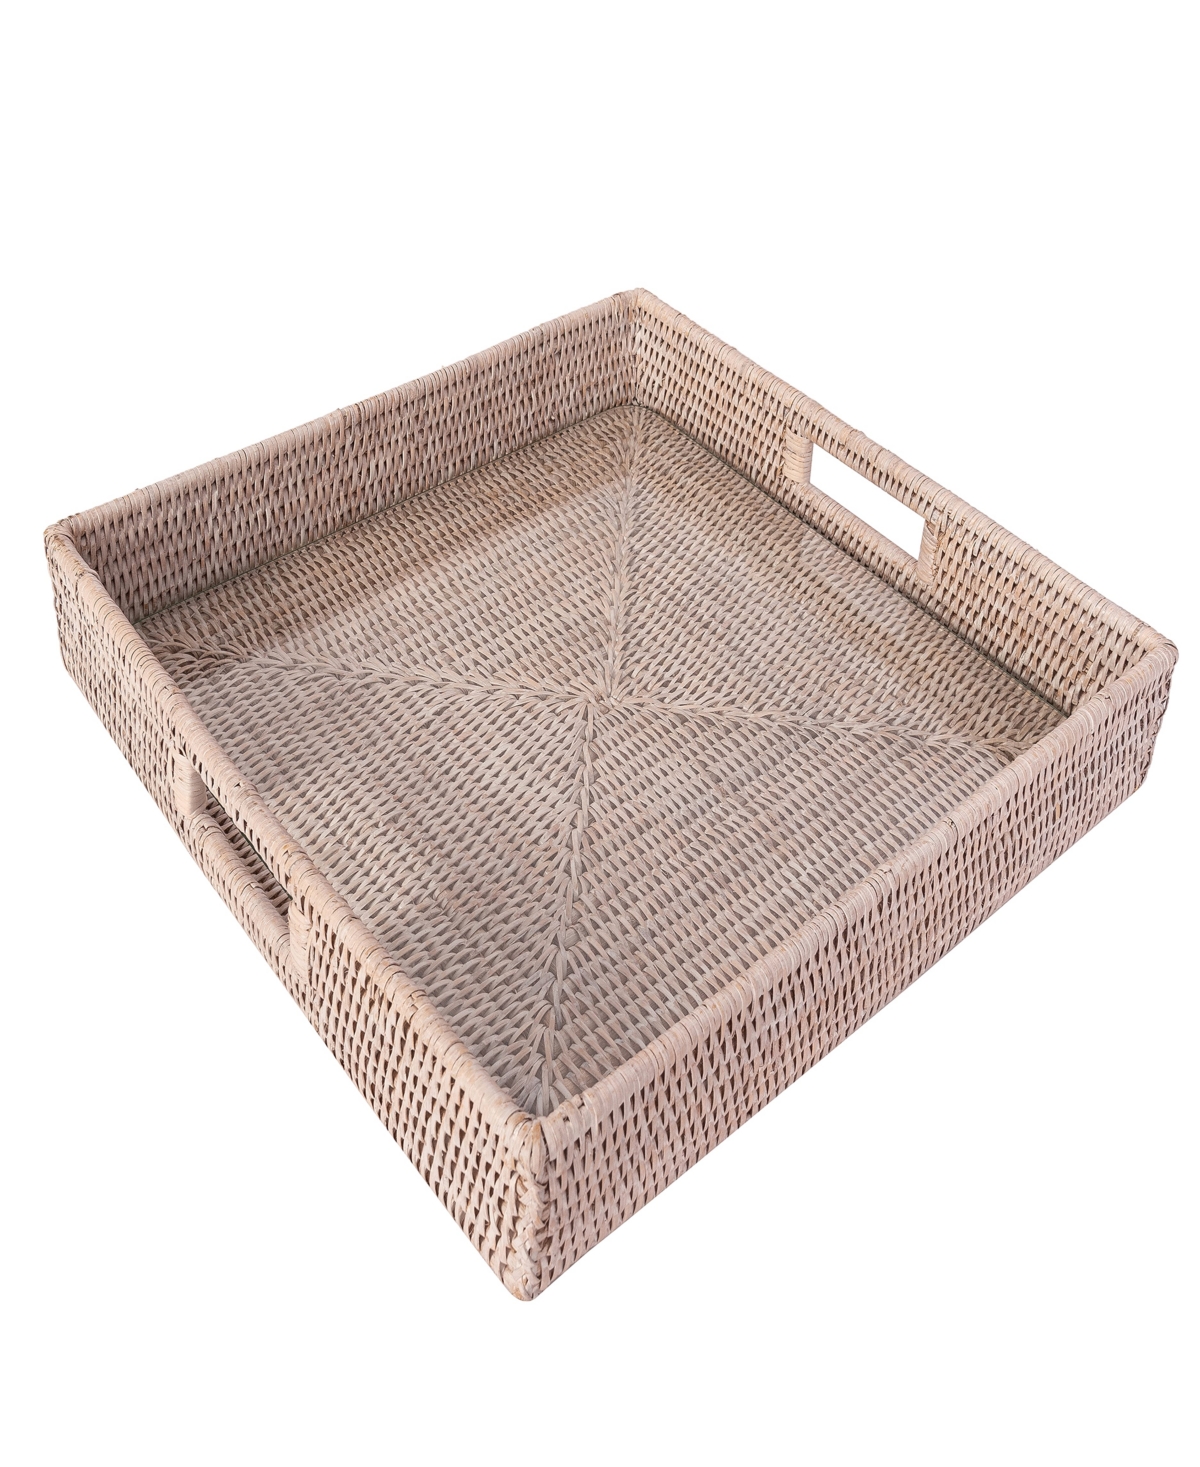 Artifacts Trading Company Artifacts Rattan Square Serving Ottoman Tray With Glass Insert In White Wash